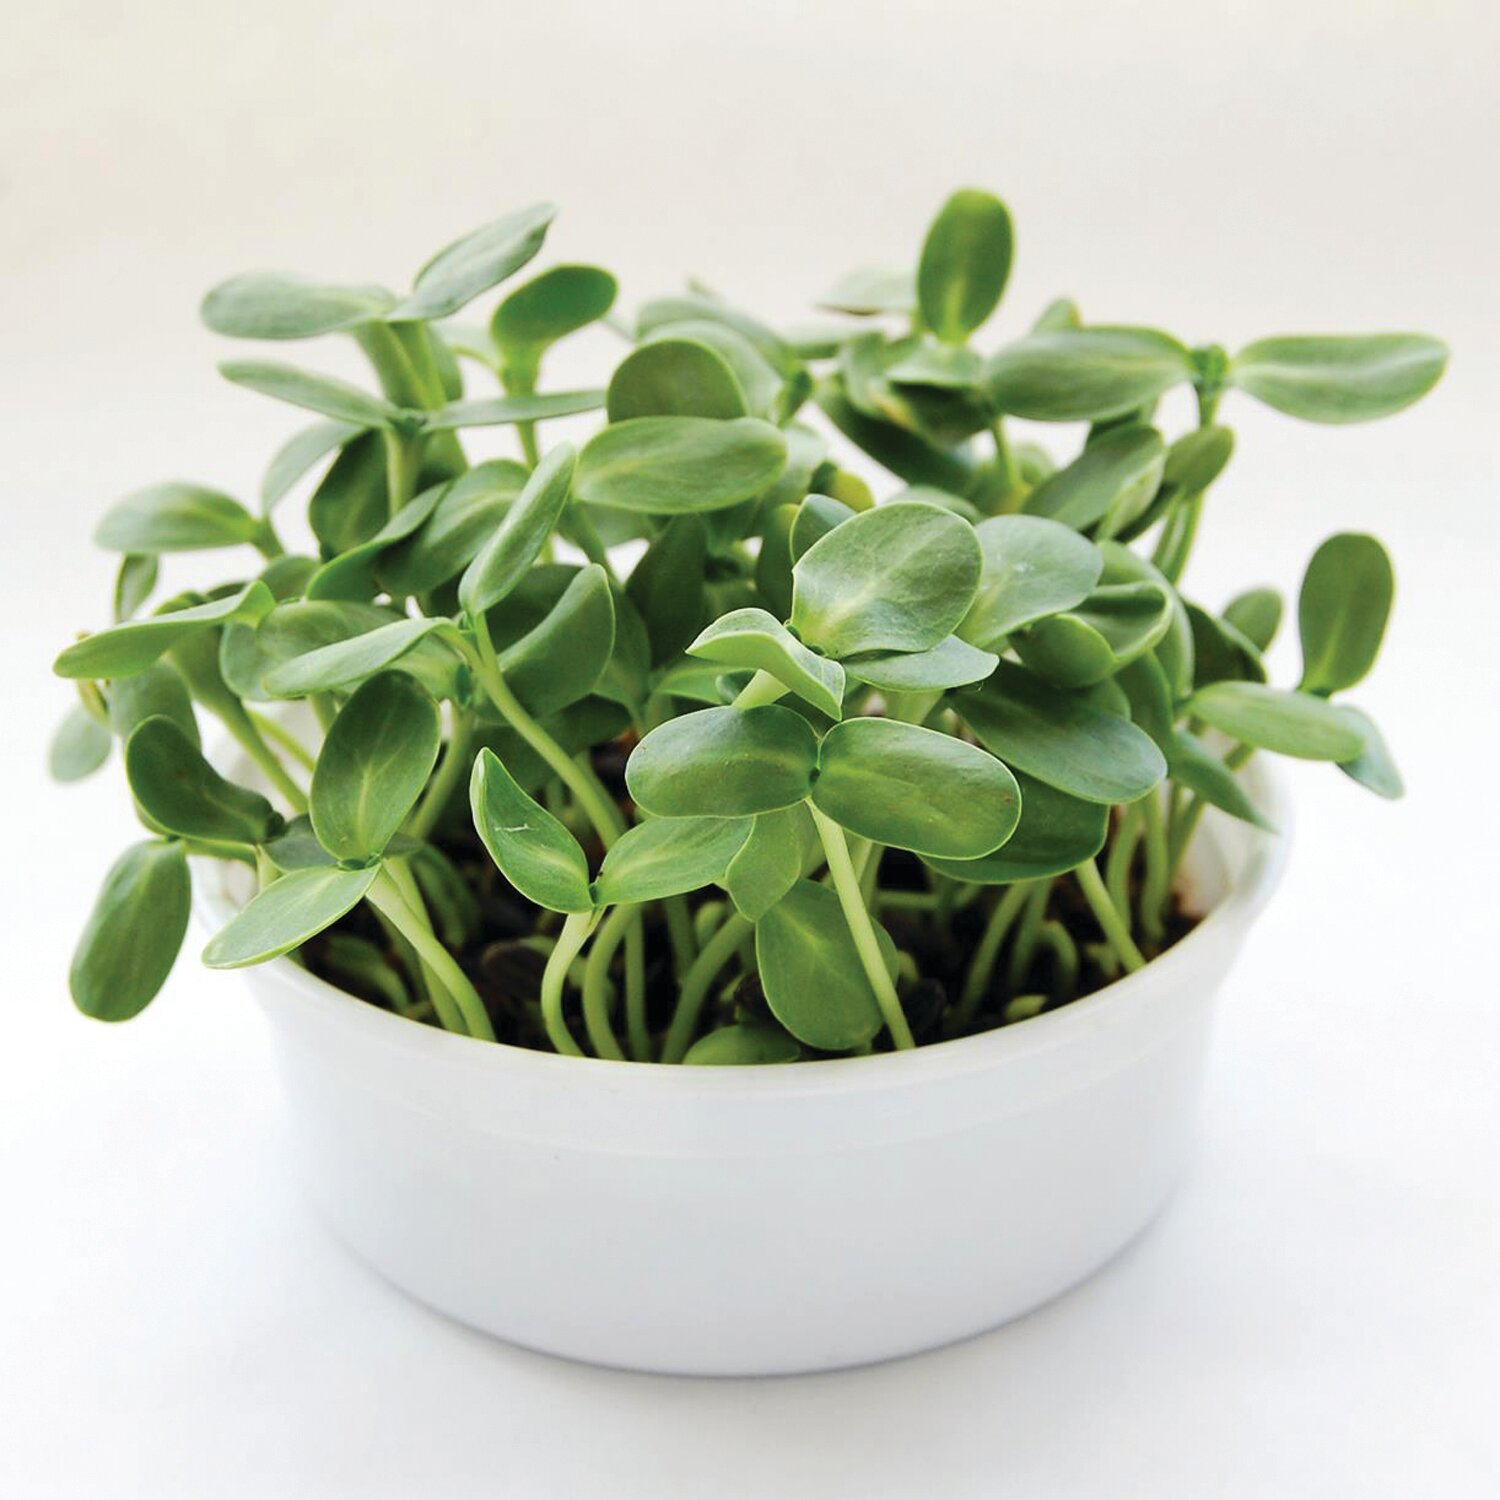 Any microgreens can be grown in soil and most varieties can also be grown hydroponically.